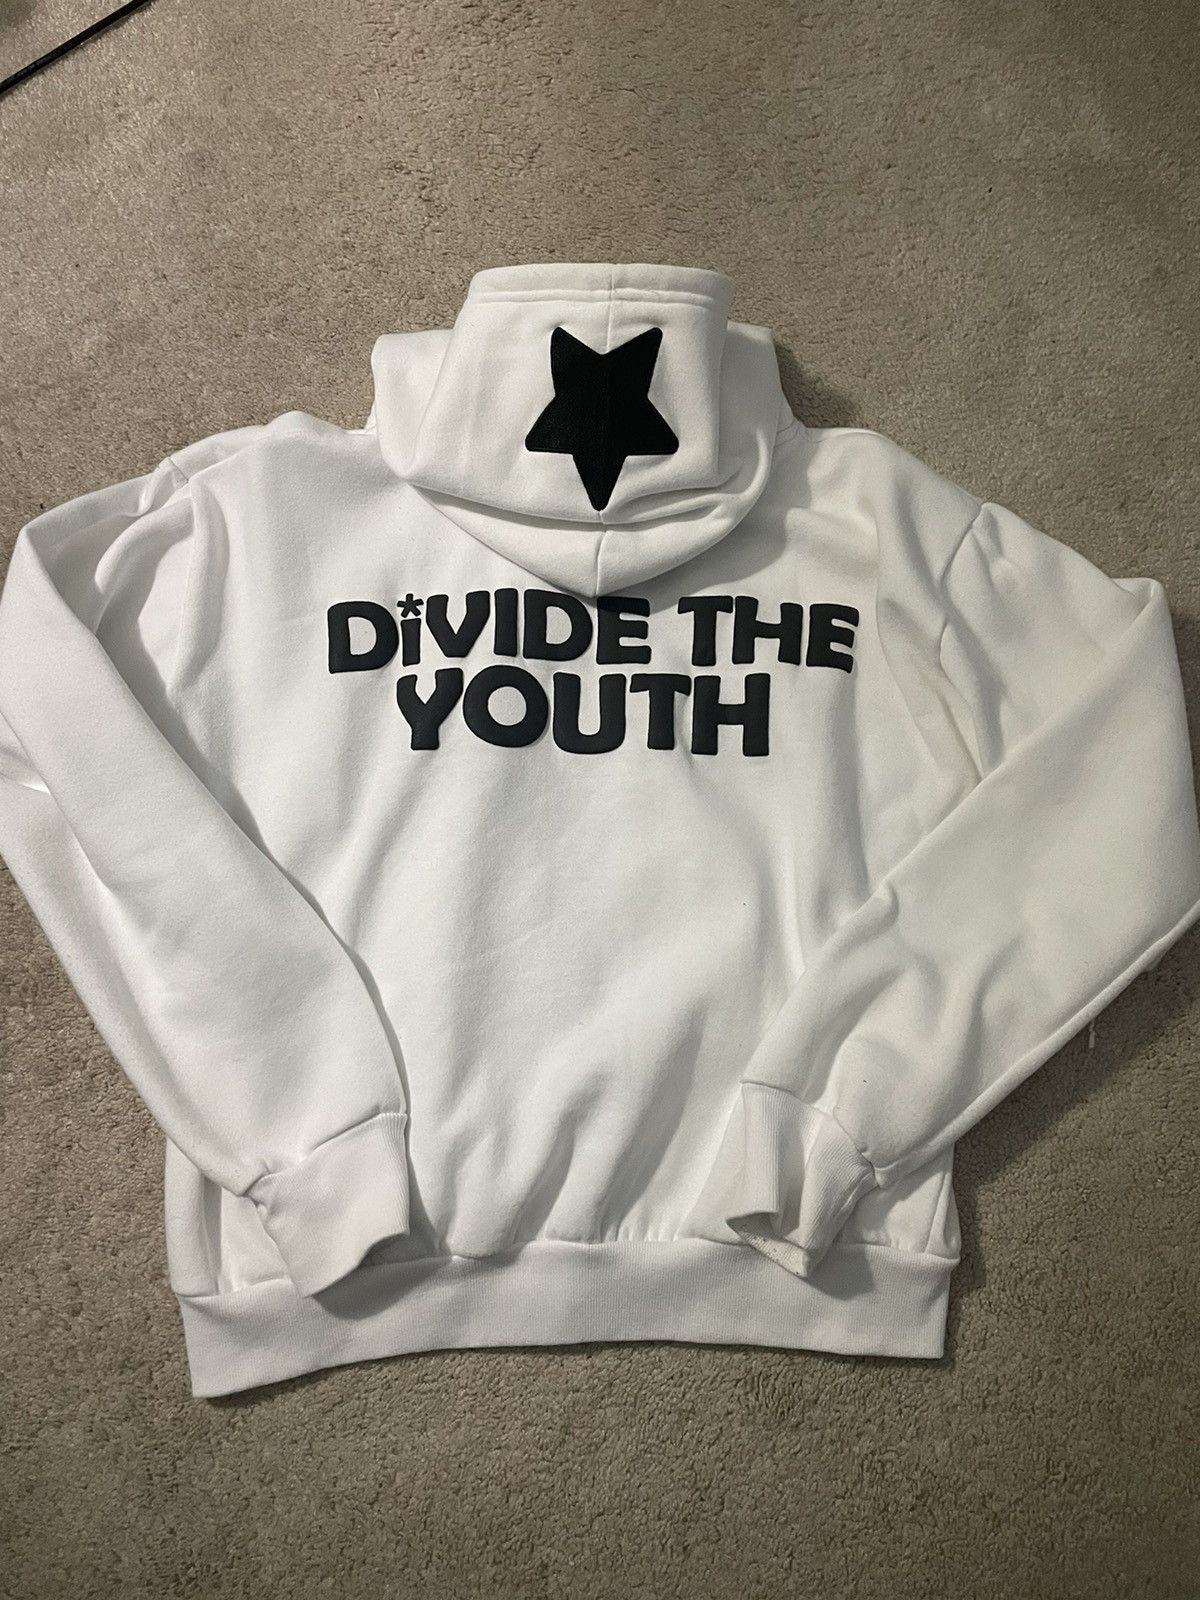 Streetwear Divide The Youth White Zip Up Hoodie Size US M / EU 48-50 / 2 - 3 Thumbnail